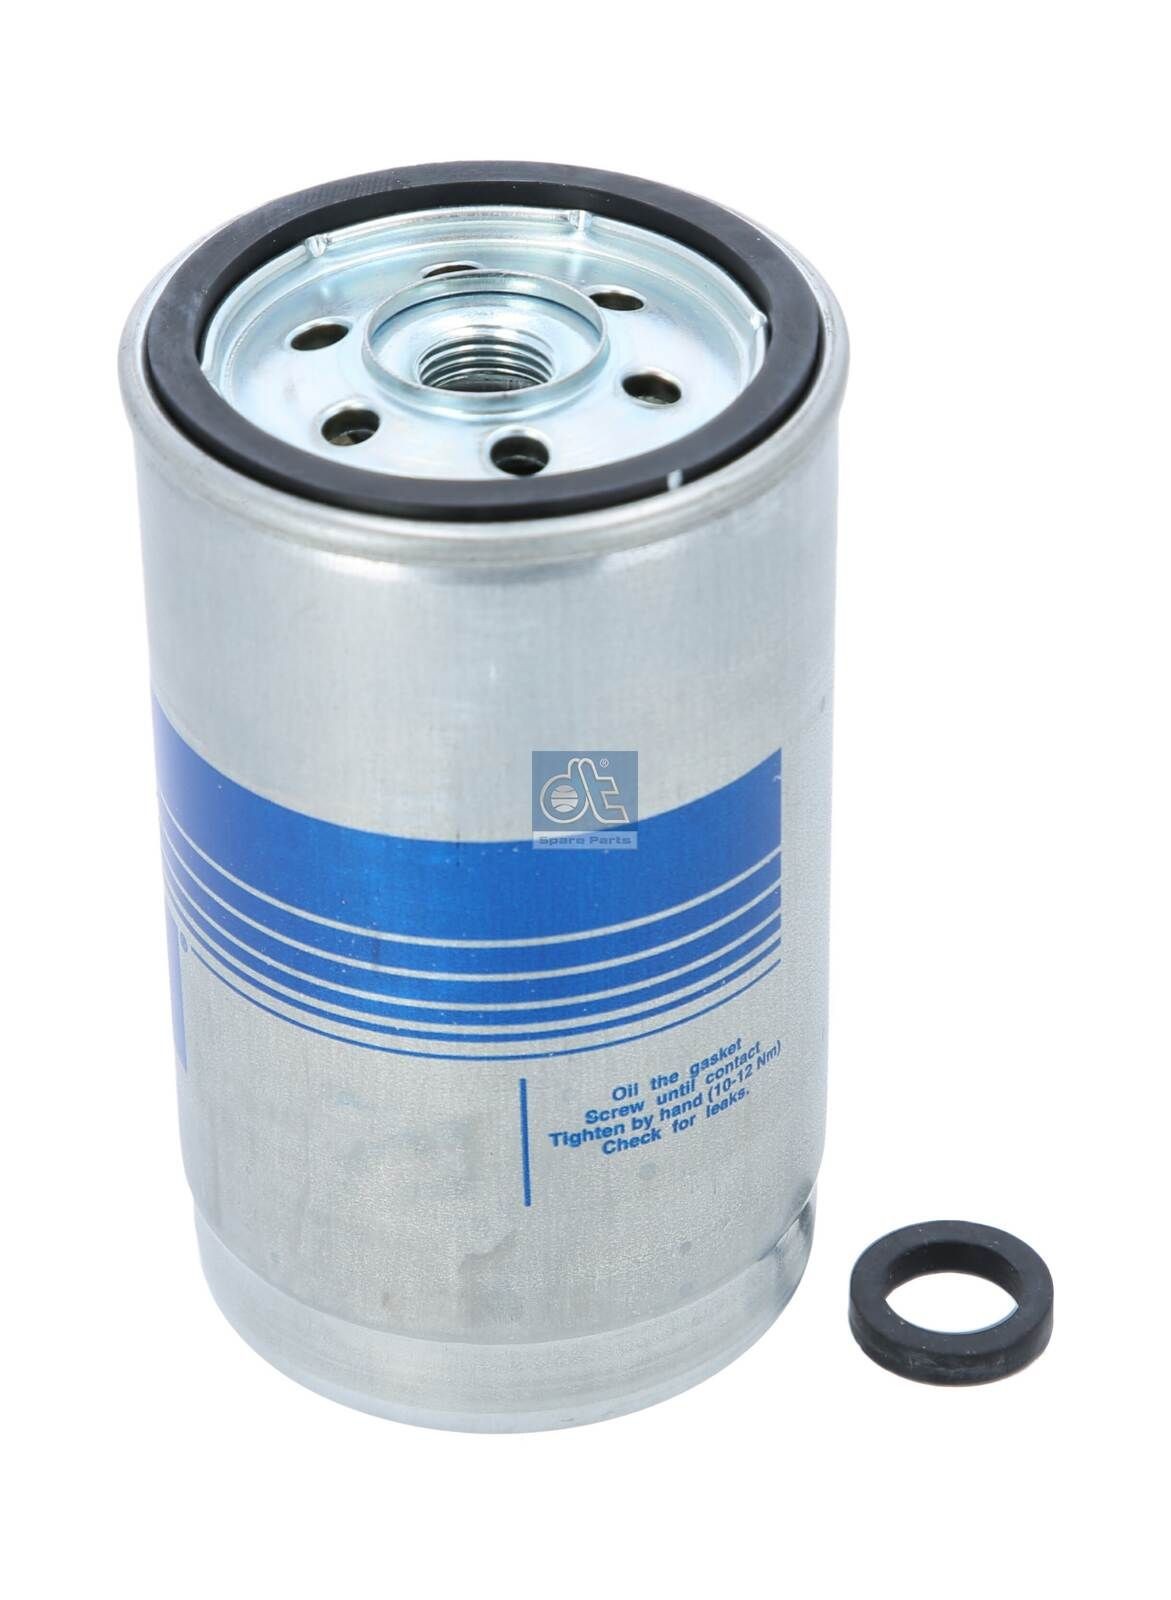 WDK 725 DT Spare Parts 3.22003 Fuel filter 0.018.354.447